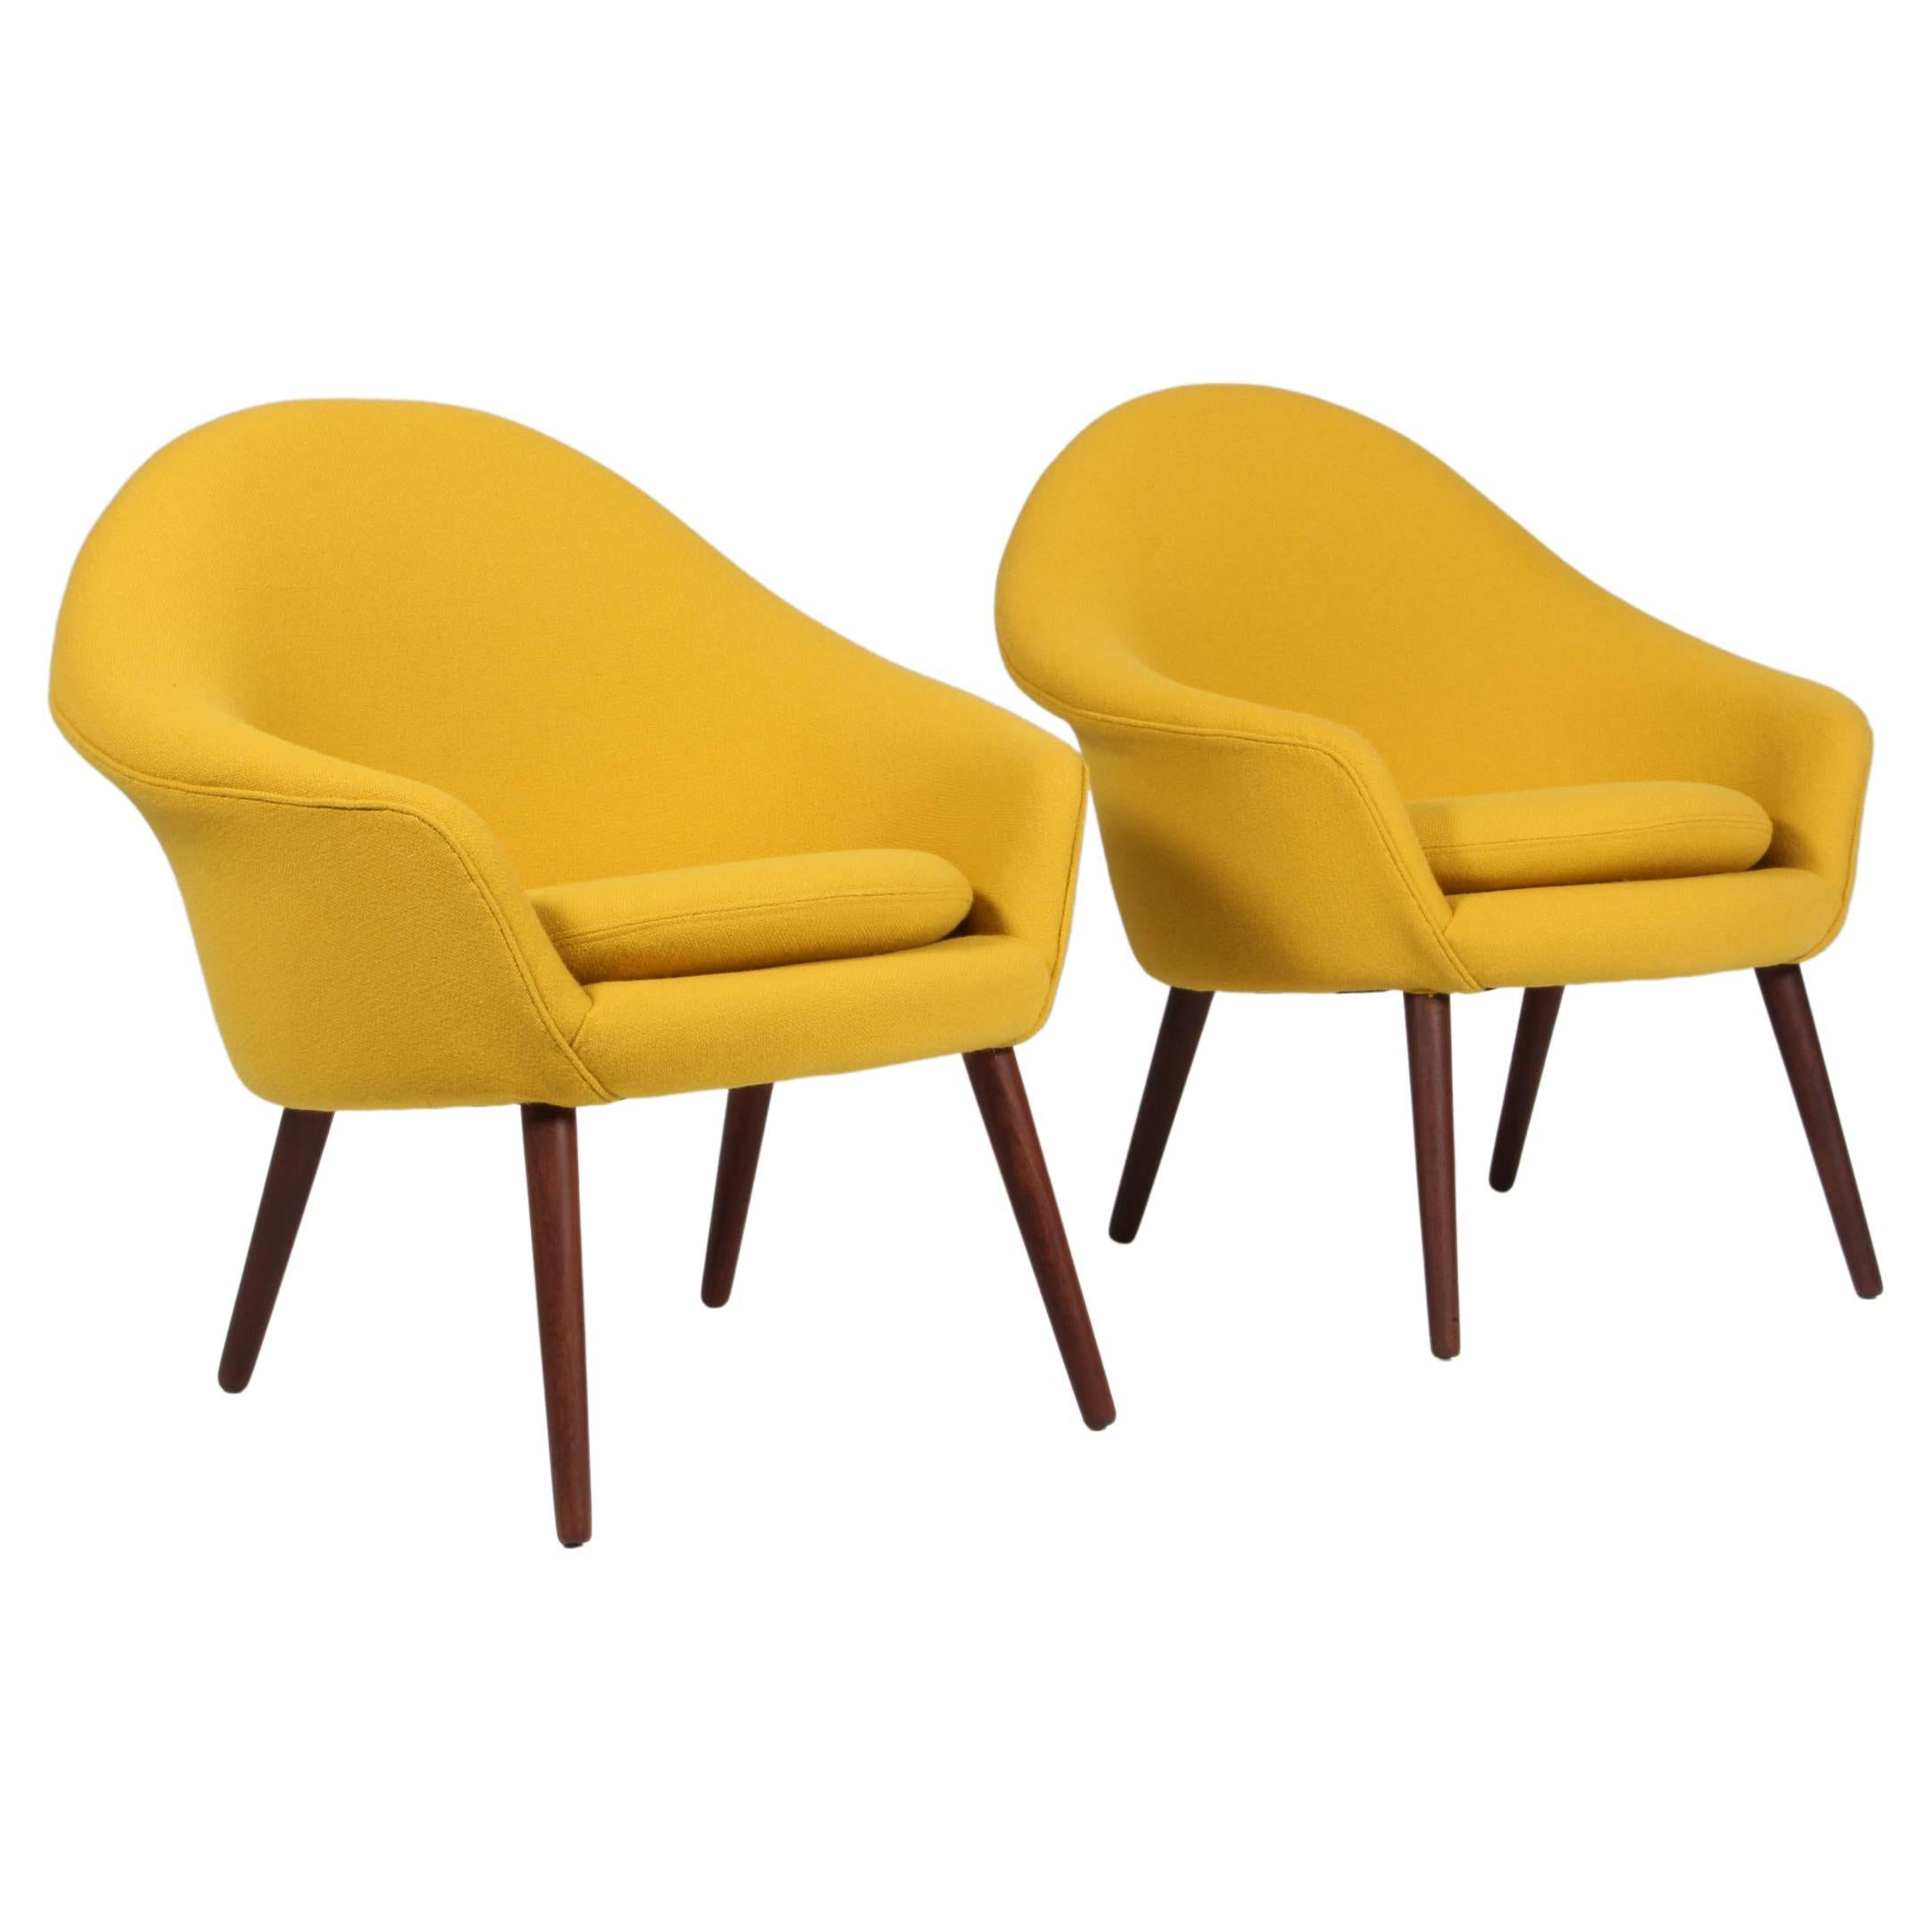 Hans Olsen, Pair of Lounge Chairs, Yellow Hallingdal from Kvadrat. Model 187 For Sale